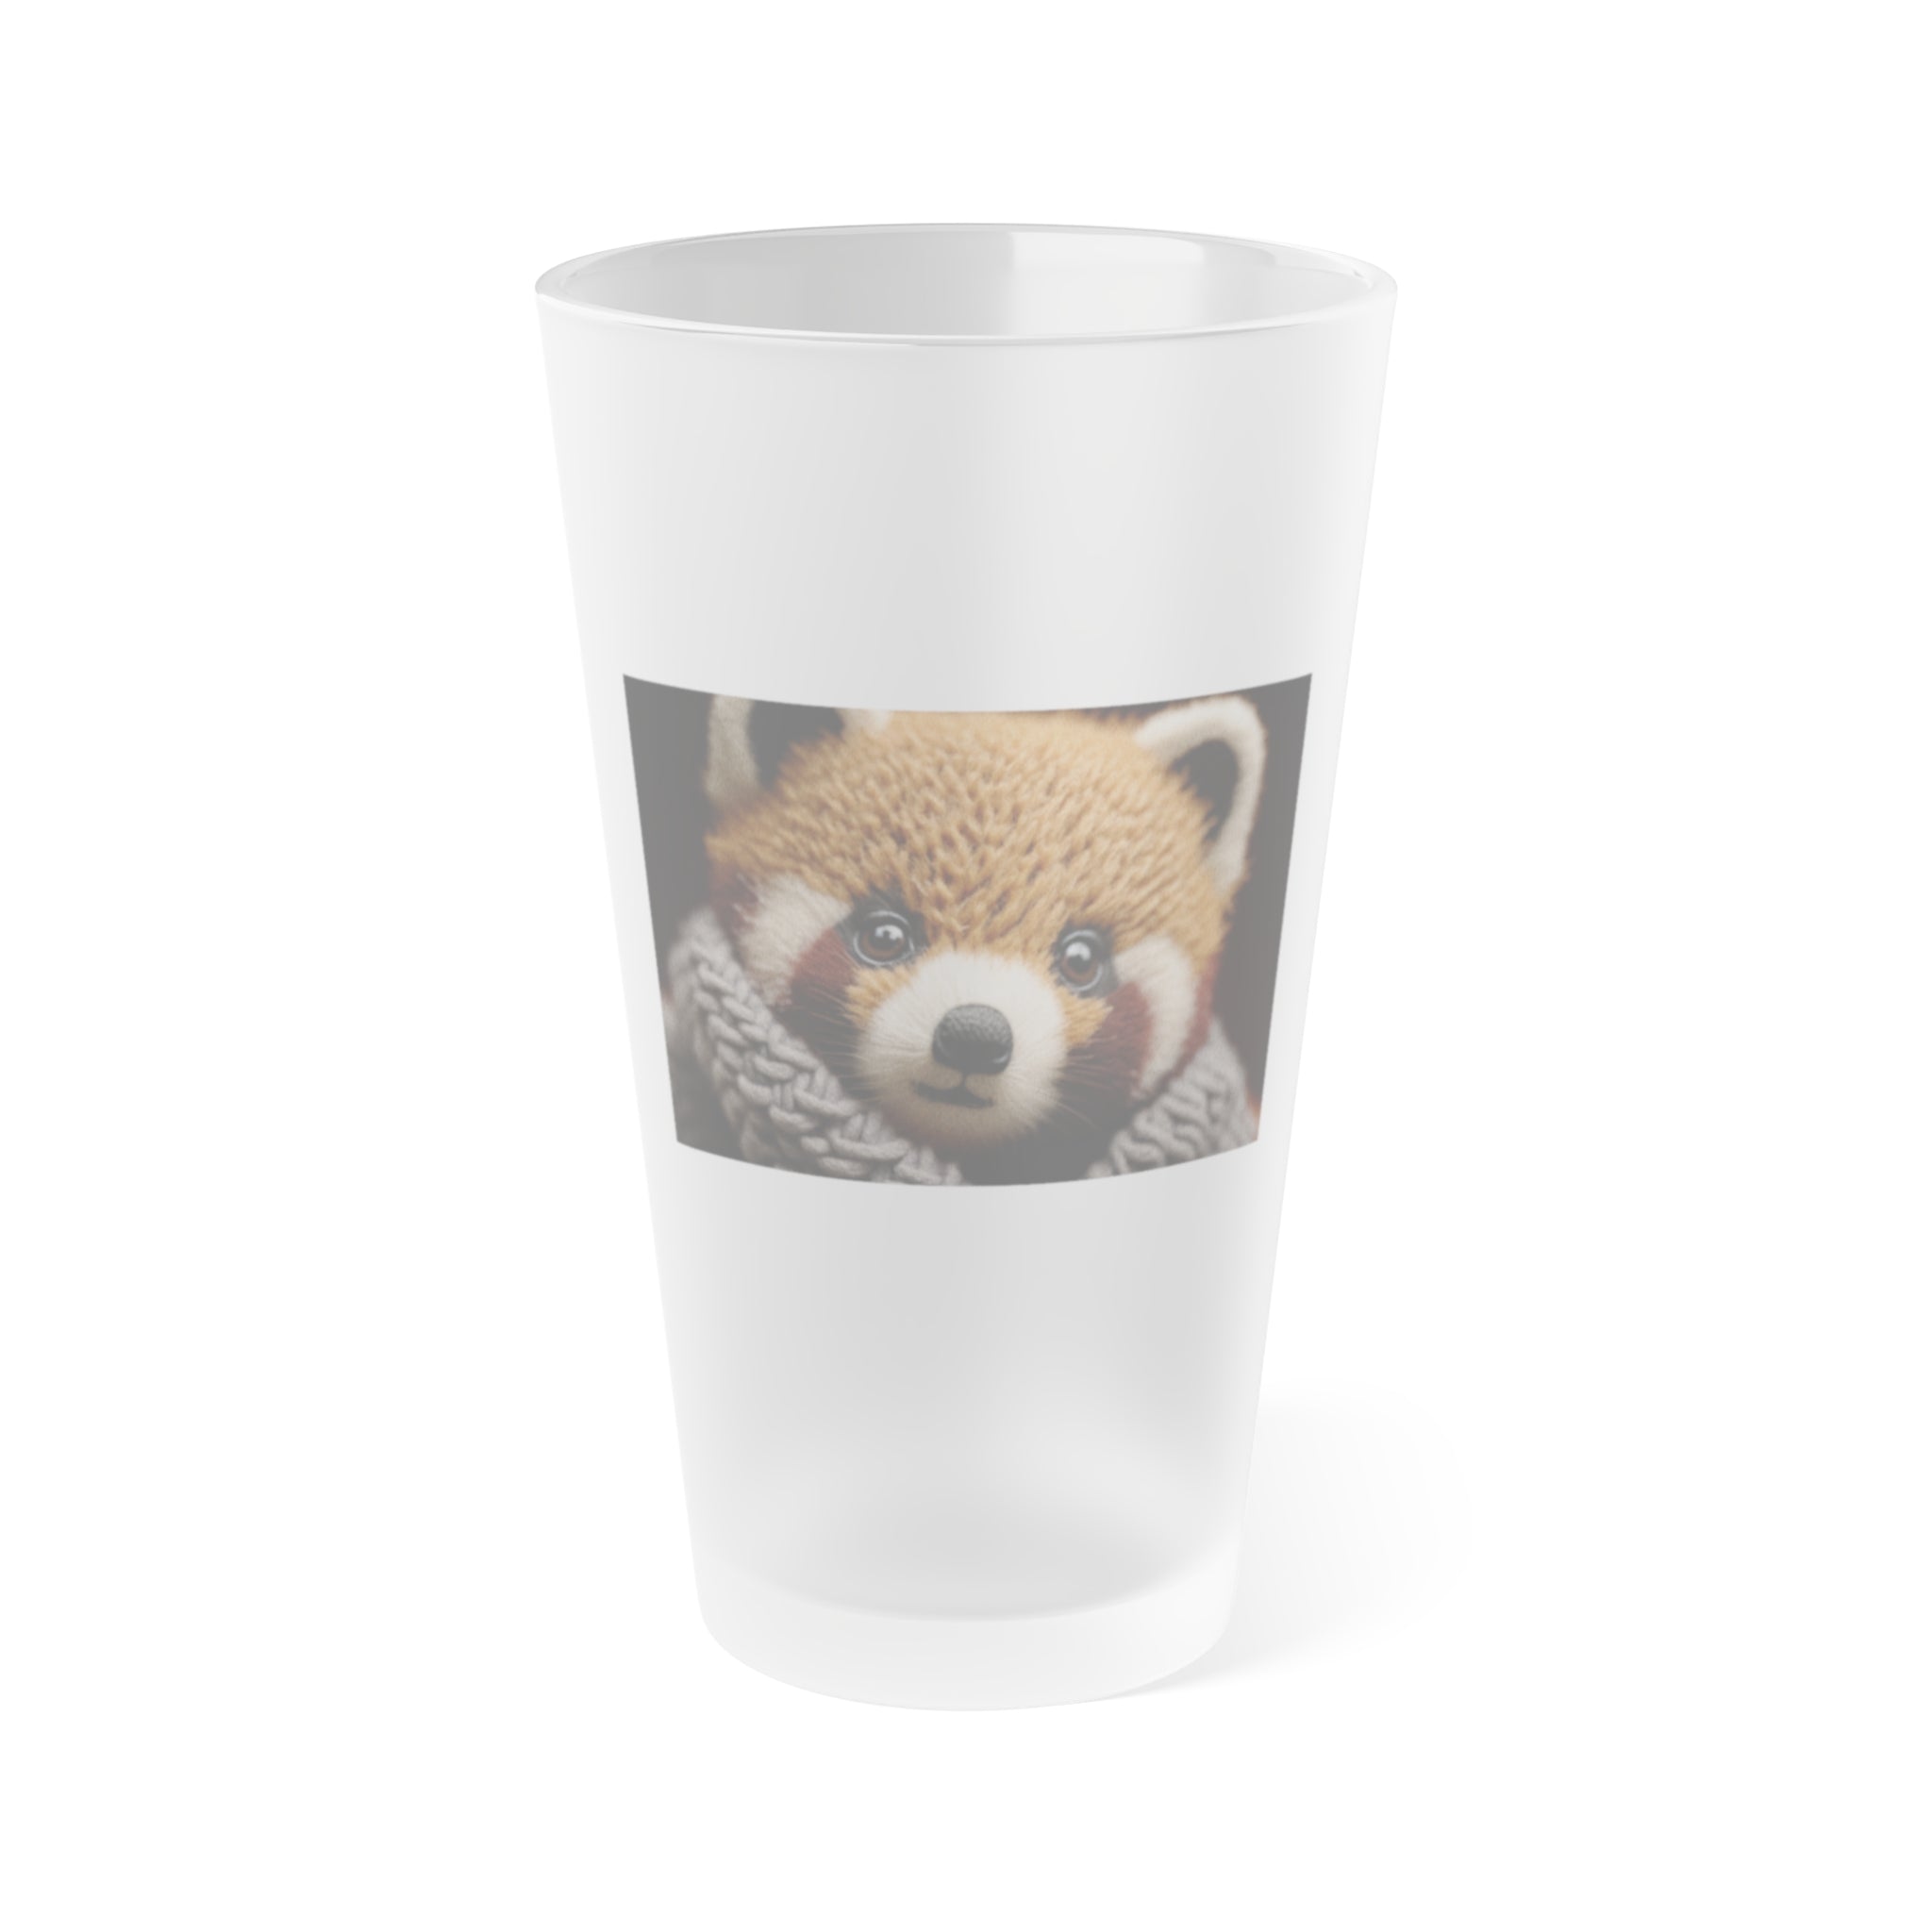 Frosted Pint Glass, 16oz - Animal Knit Arts, Red Panda cub